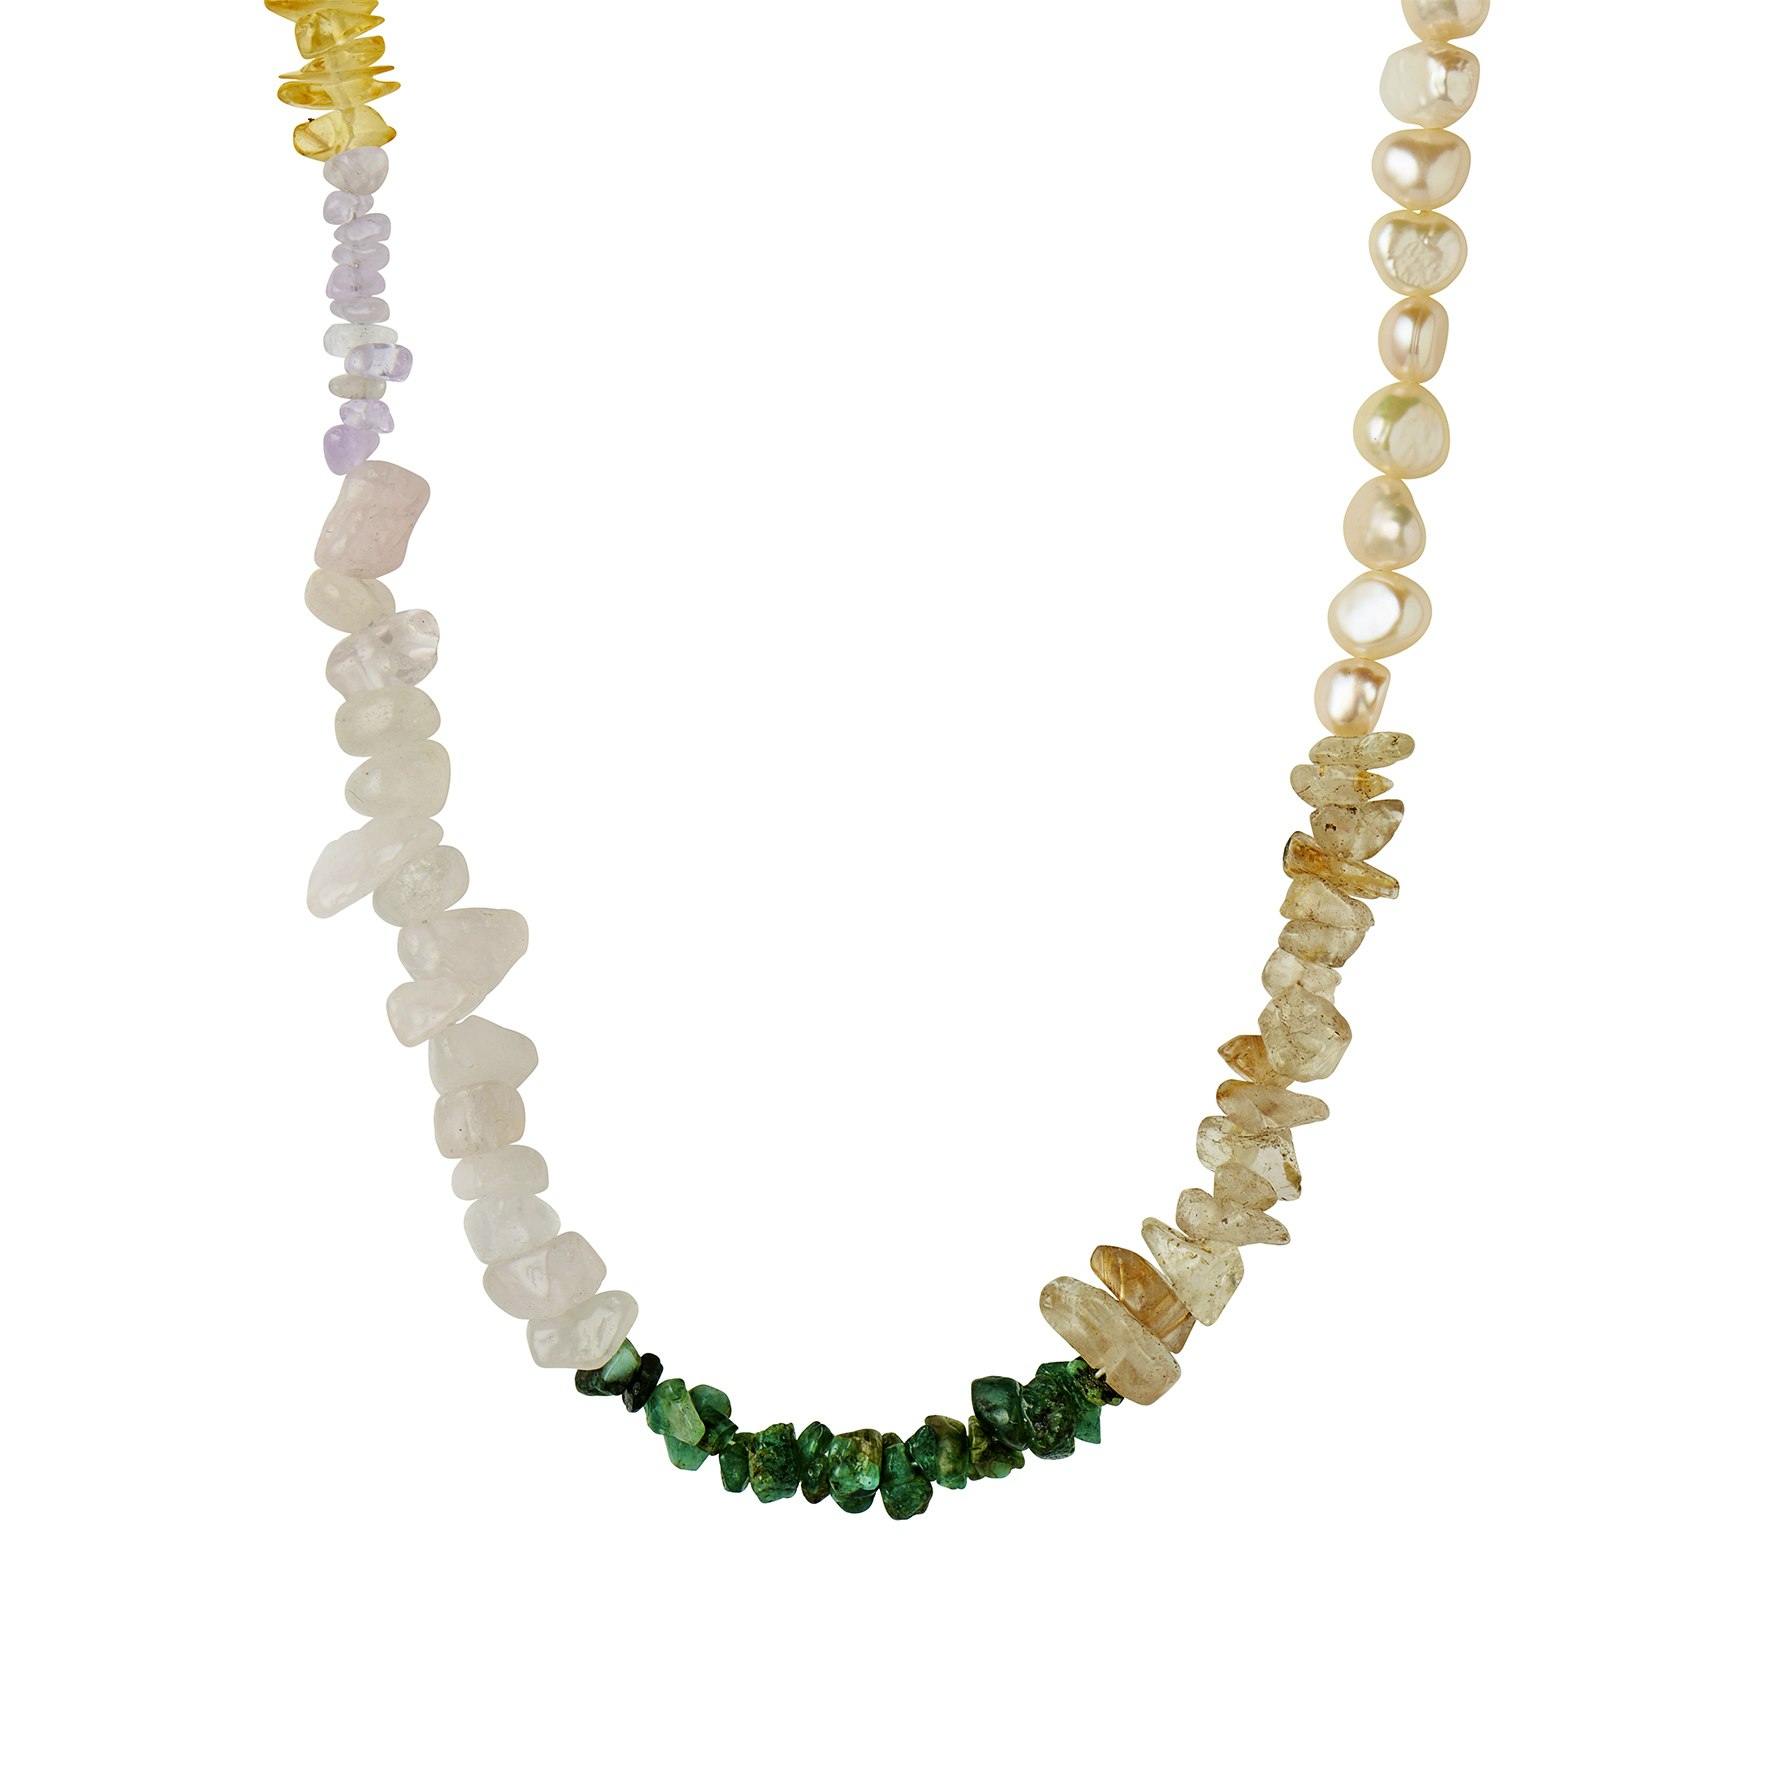 Crispy Coast Necklace - Pacific Colors With Pearls & Gemstones fra STINE A Jewelry i Forgyldt-Sølv Sterling 925